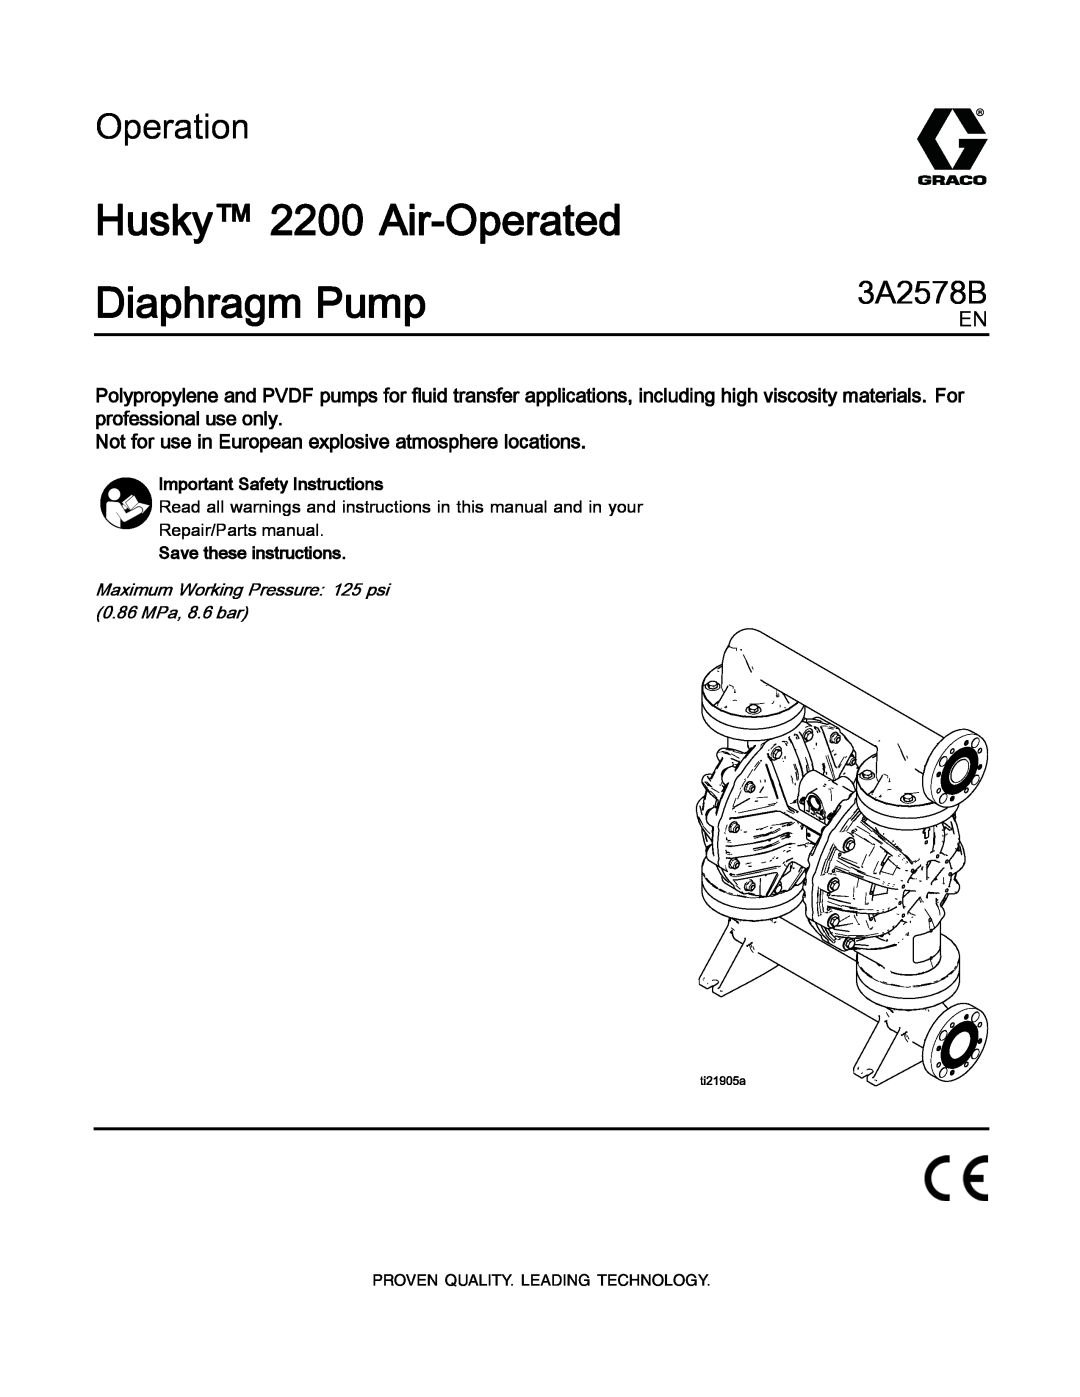 Graco 3A2578B important safety instructions Husky 2200 Air-OperatedDiaphragm Pump, Operation 